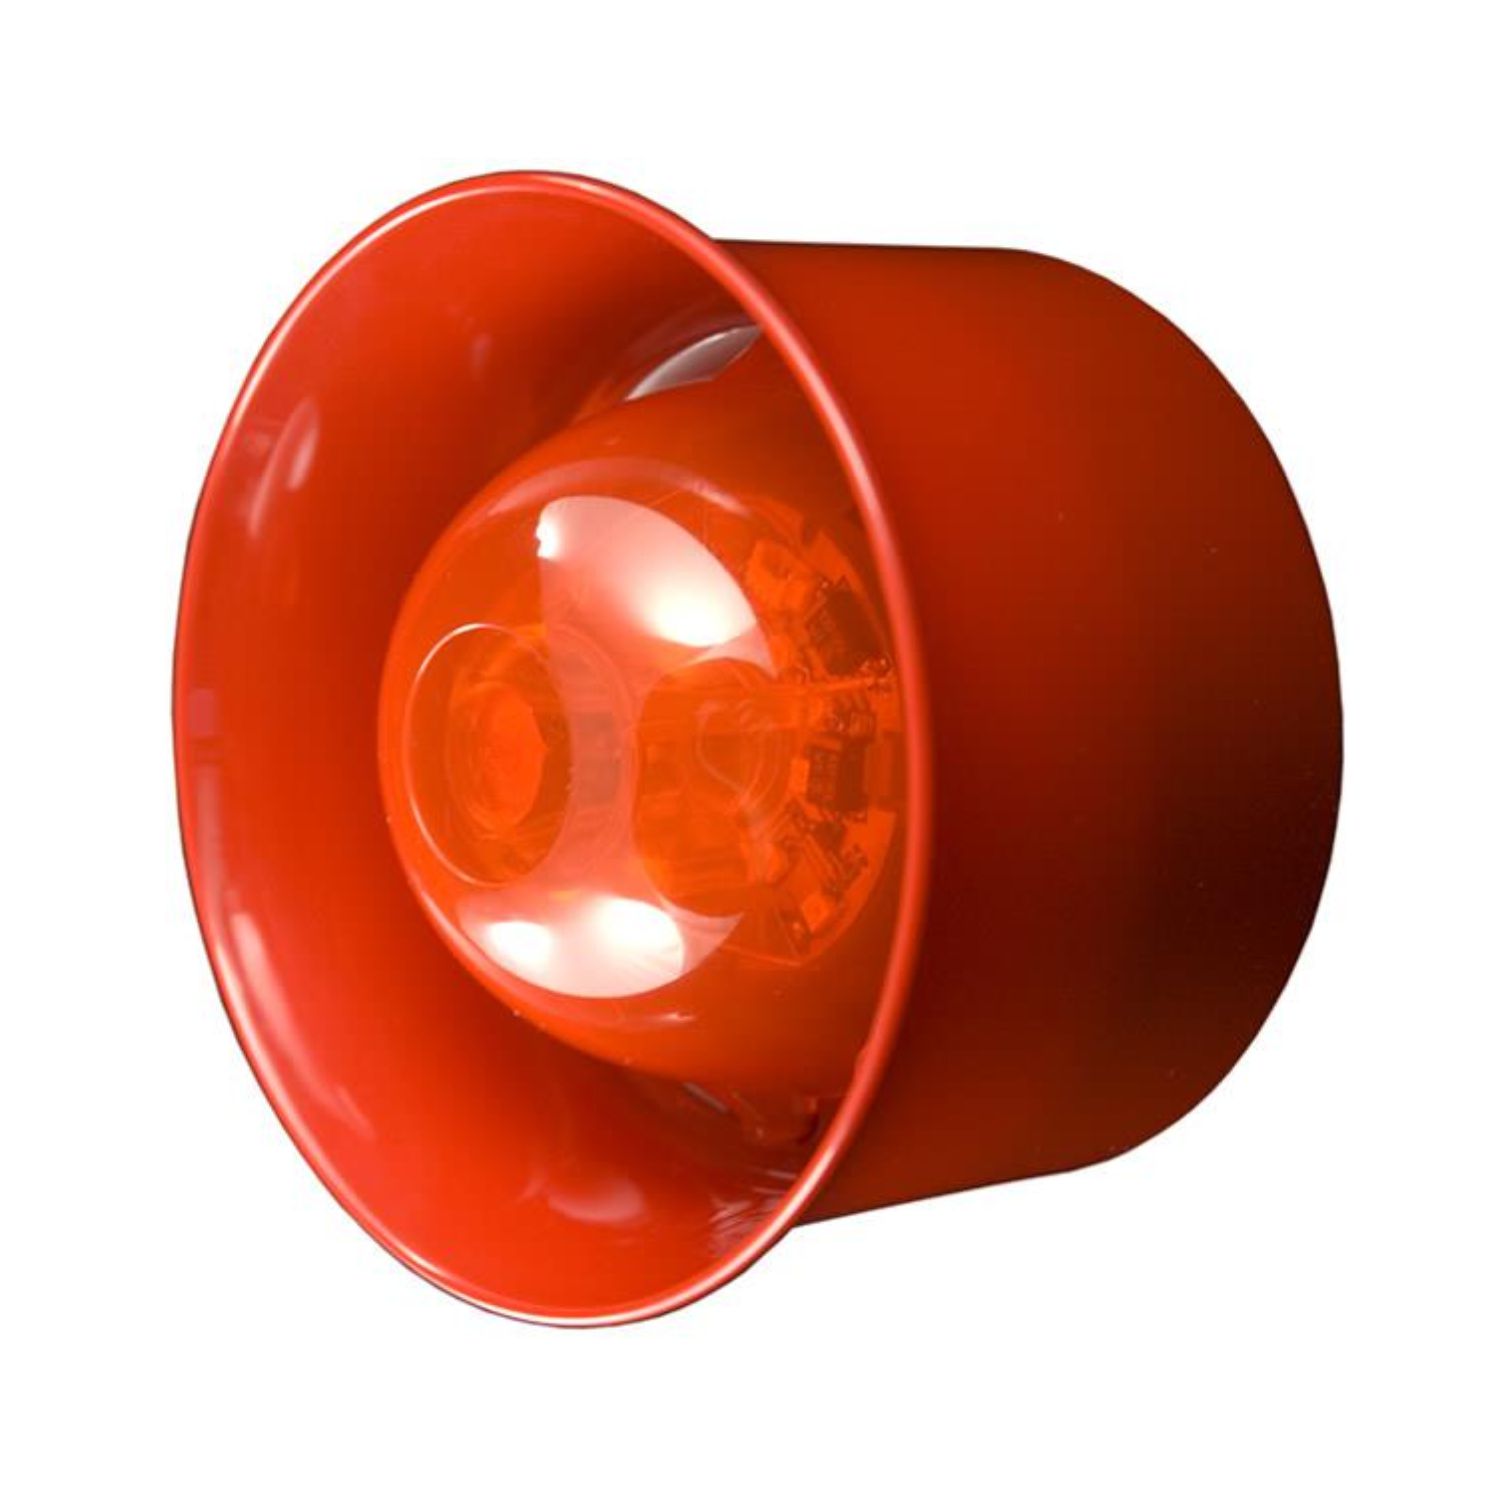 CHQ-WSB Wall Sounder Beacon - red case, red lens